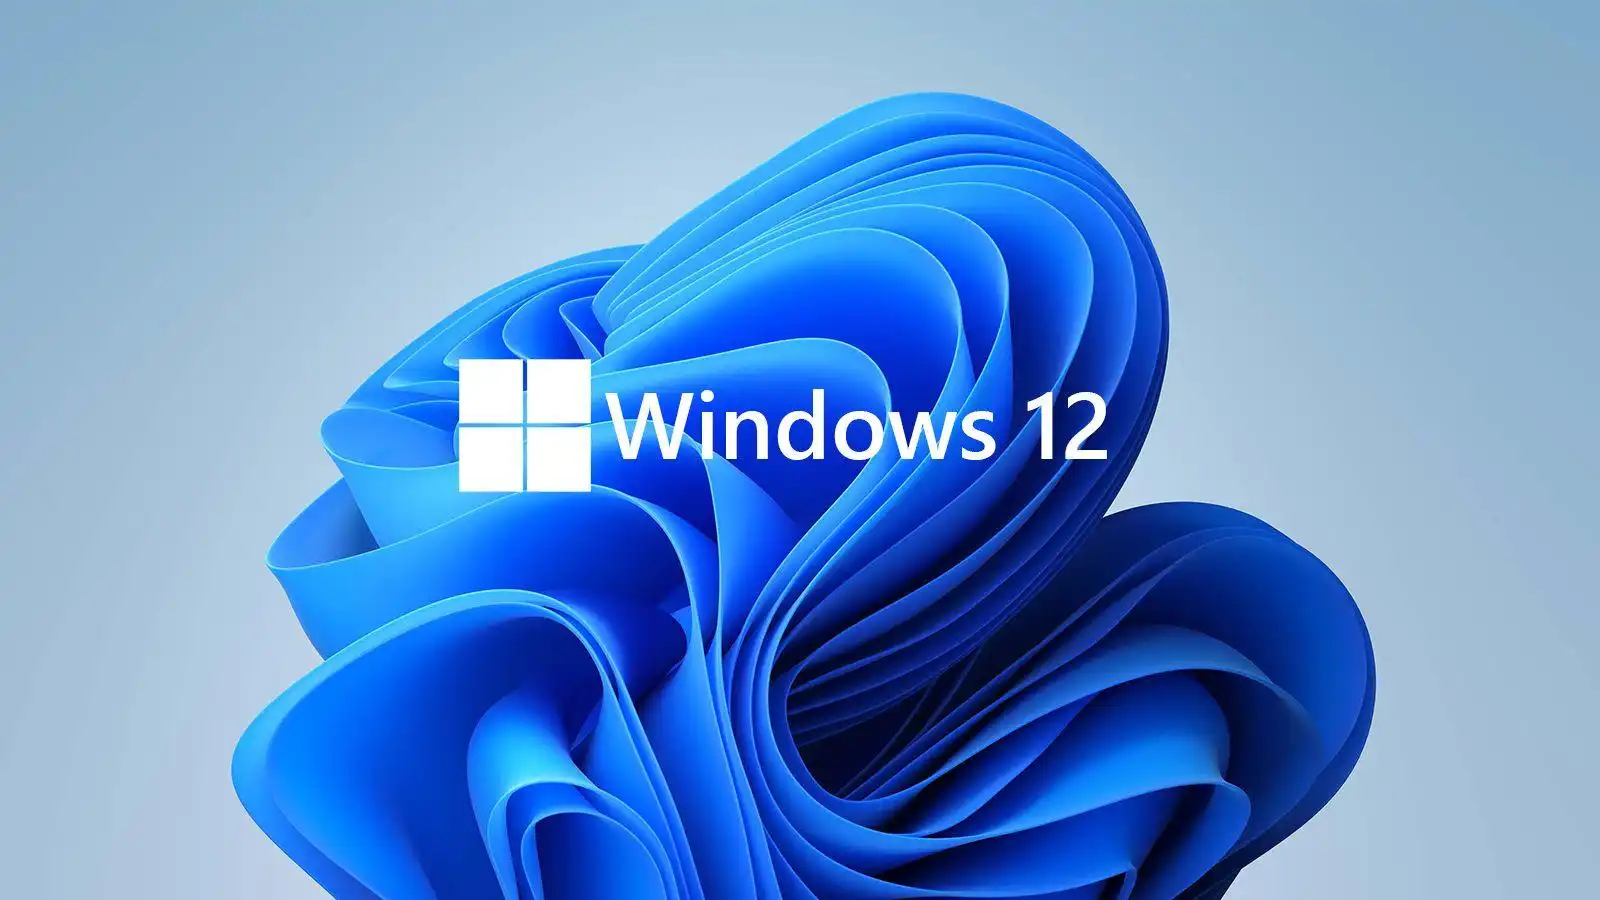 What's New with Windows 12? Exciting Features and Release Date Rumors Unveiled